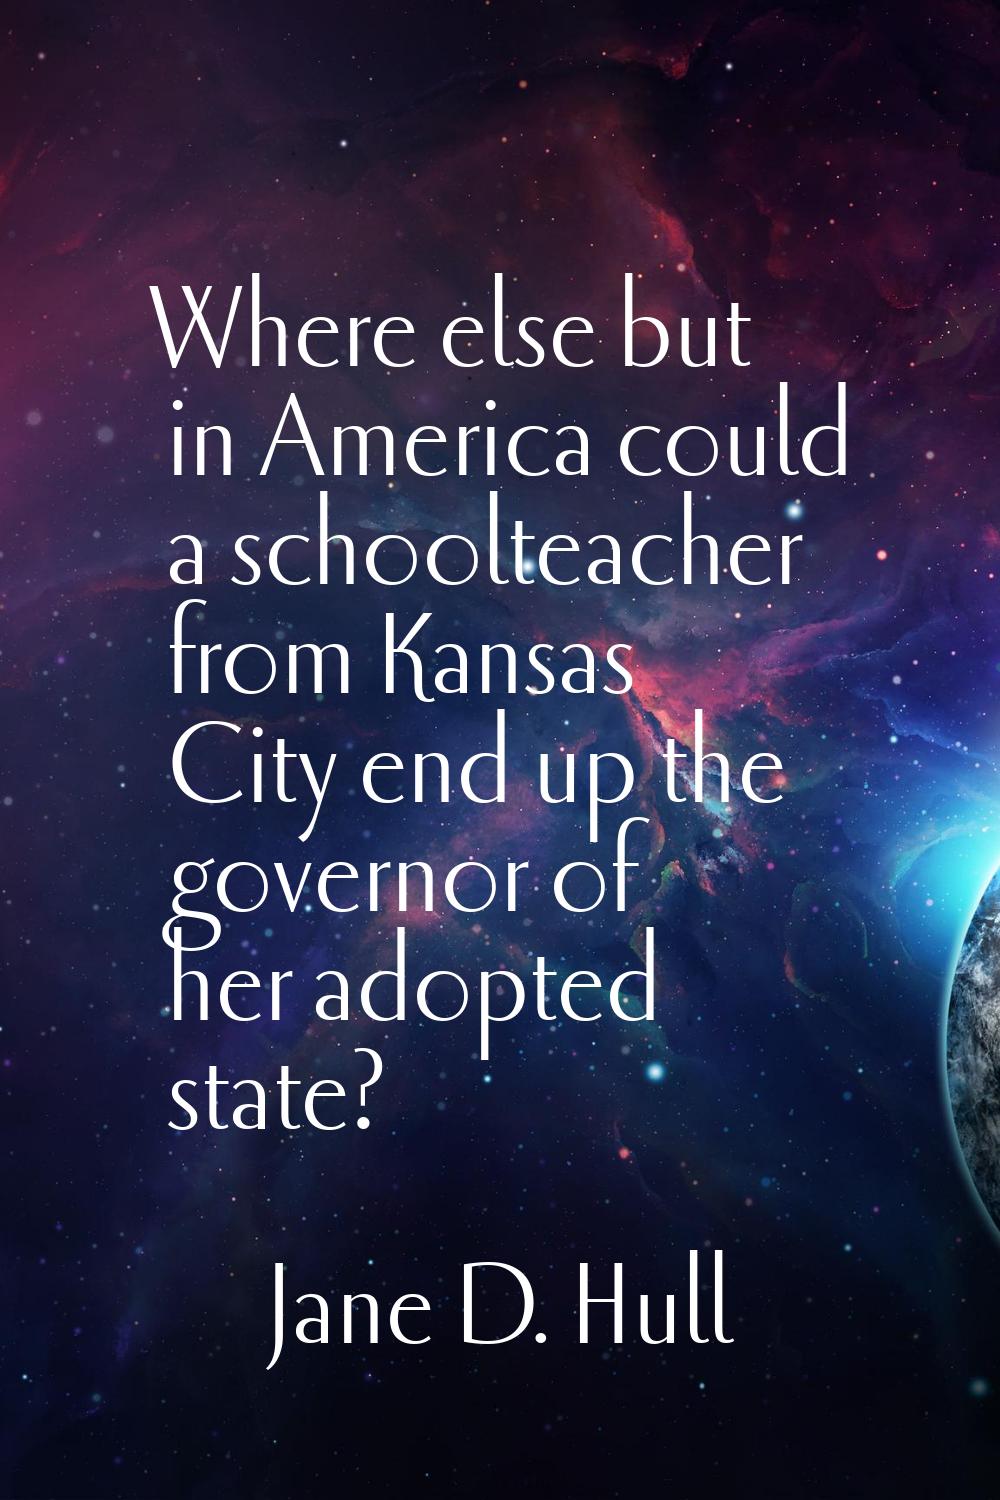 Where else but in America could a schoolteacher from Kansas City end up the governor of her adopted